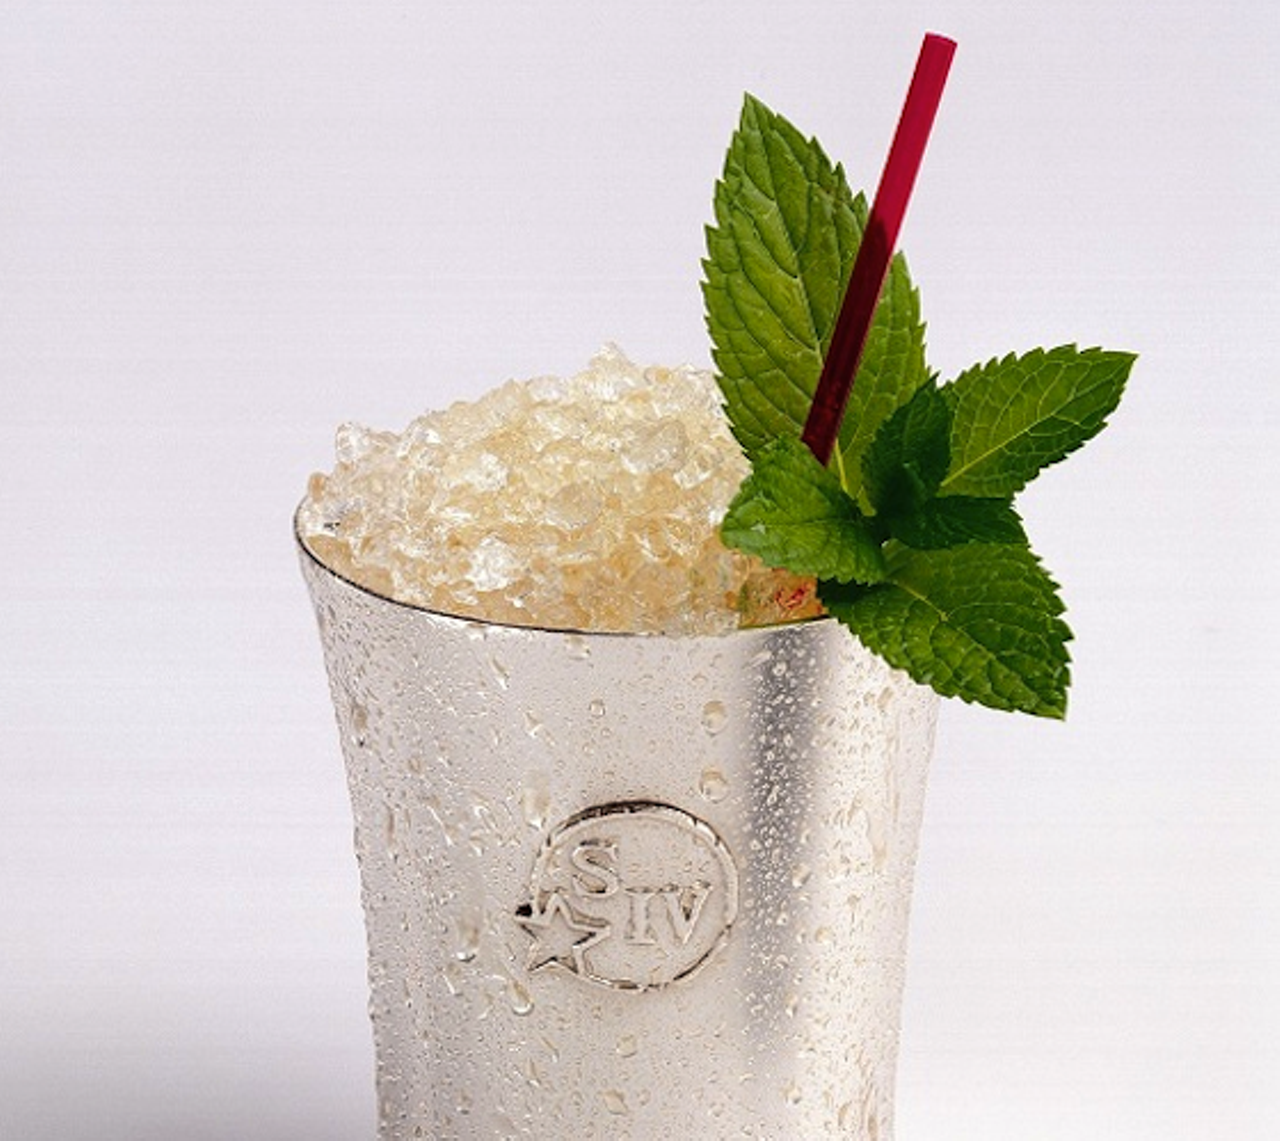 ...While the Derby's cocktail is the mint julep. 
Check out Bill Sameuls' recipe for the perfect mint julep.